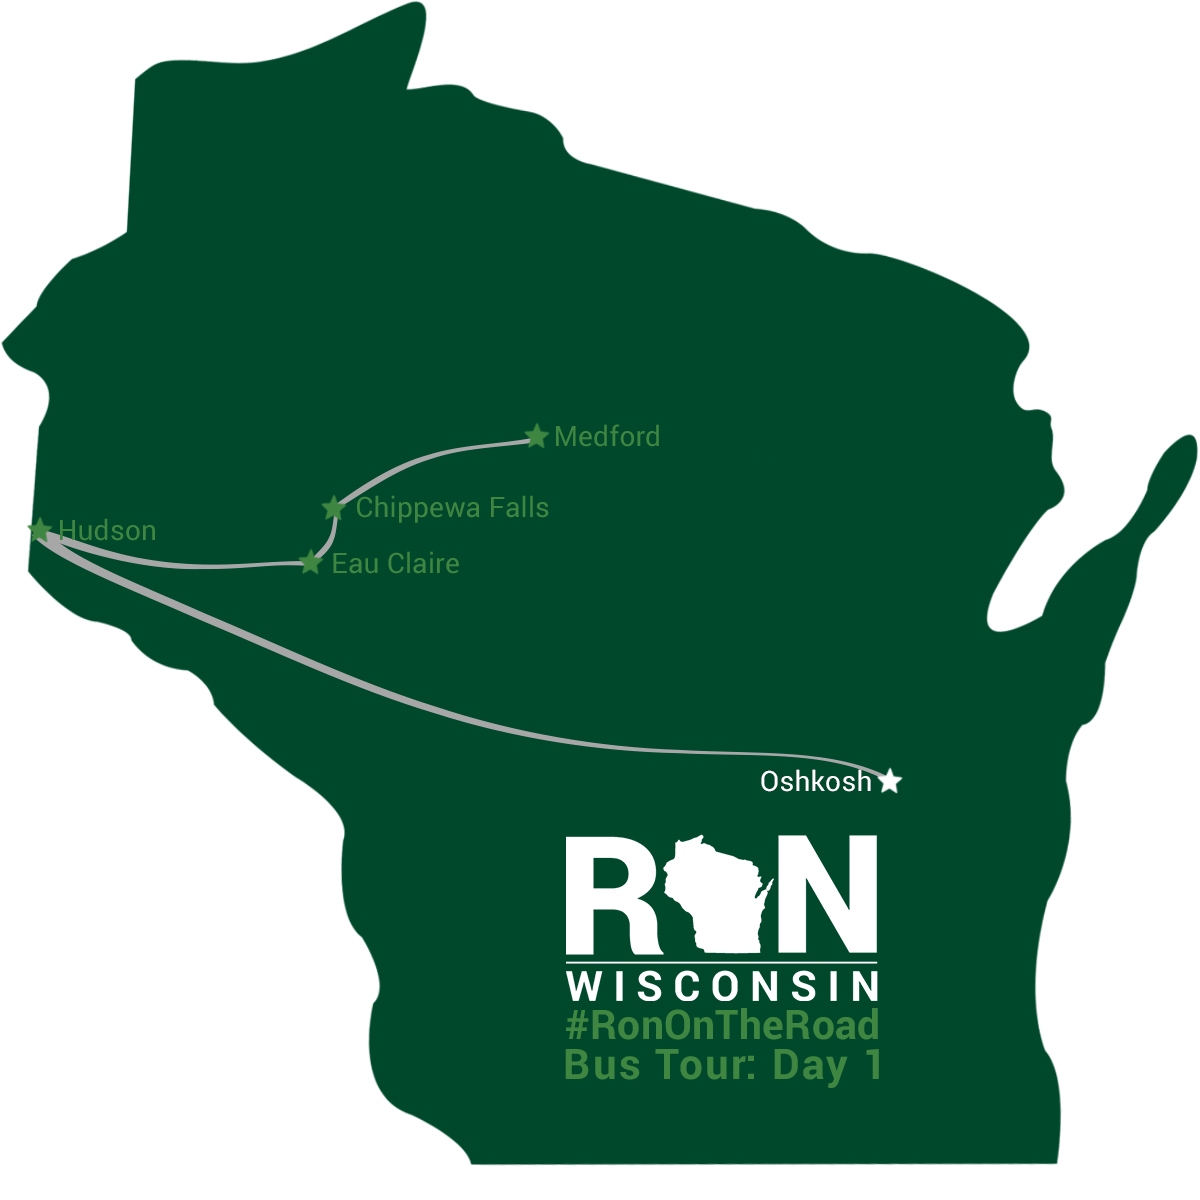 #RonOnTheRoad Bus Tour: Day 1